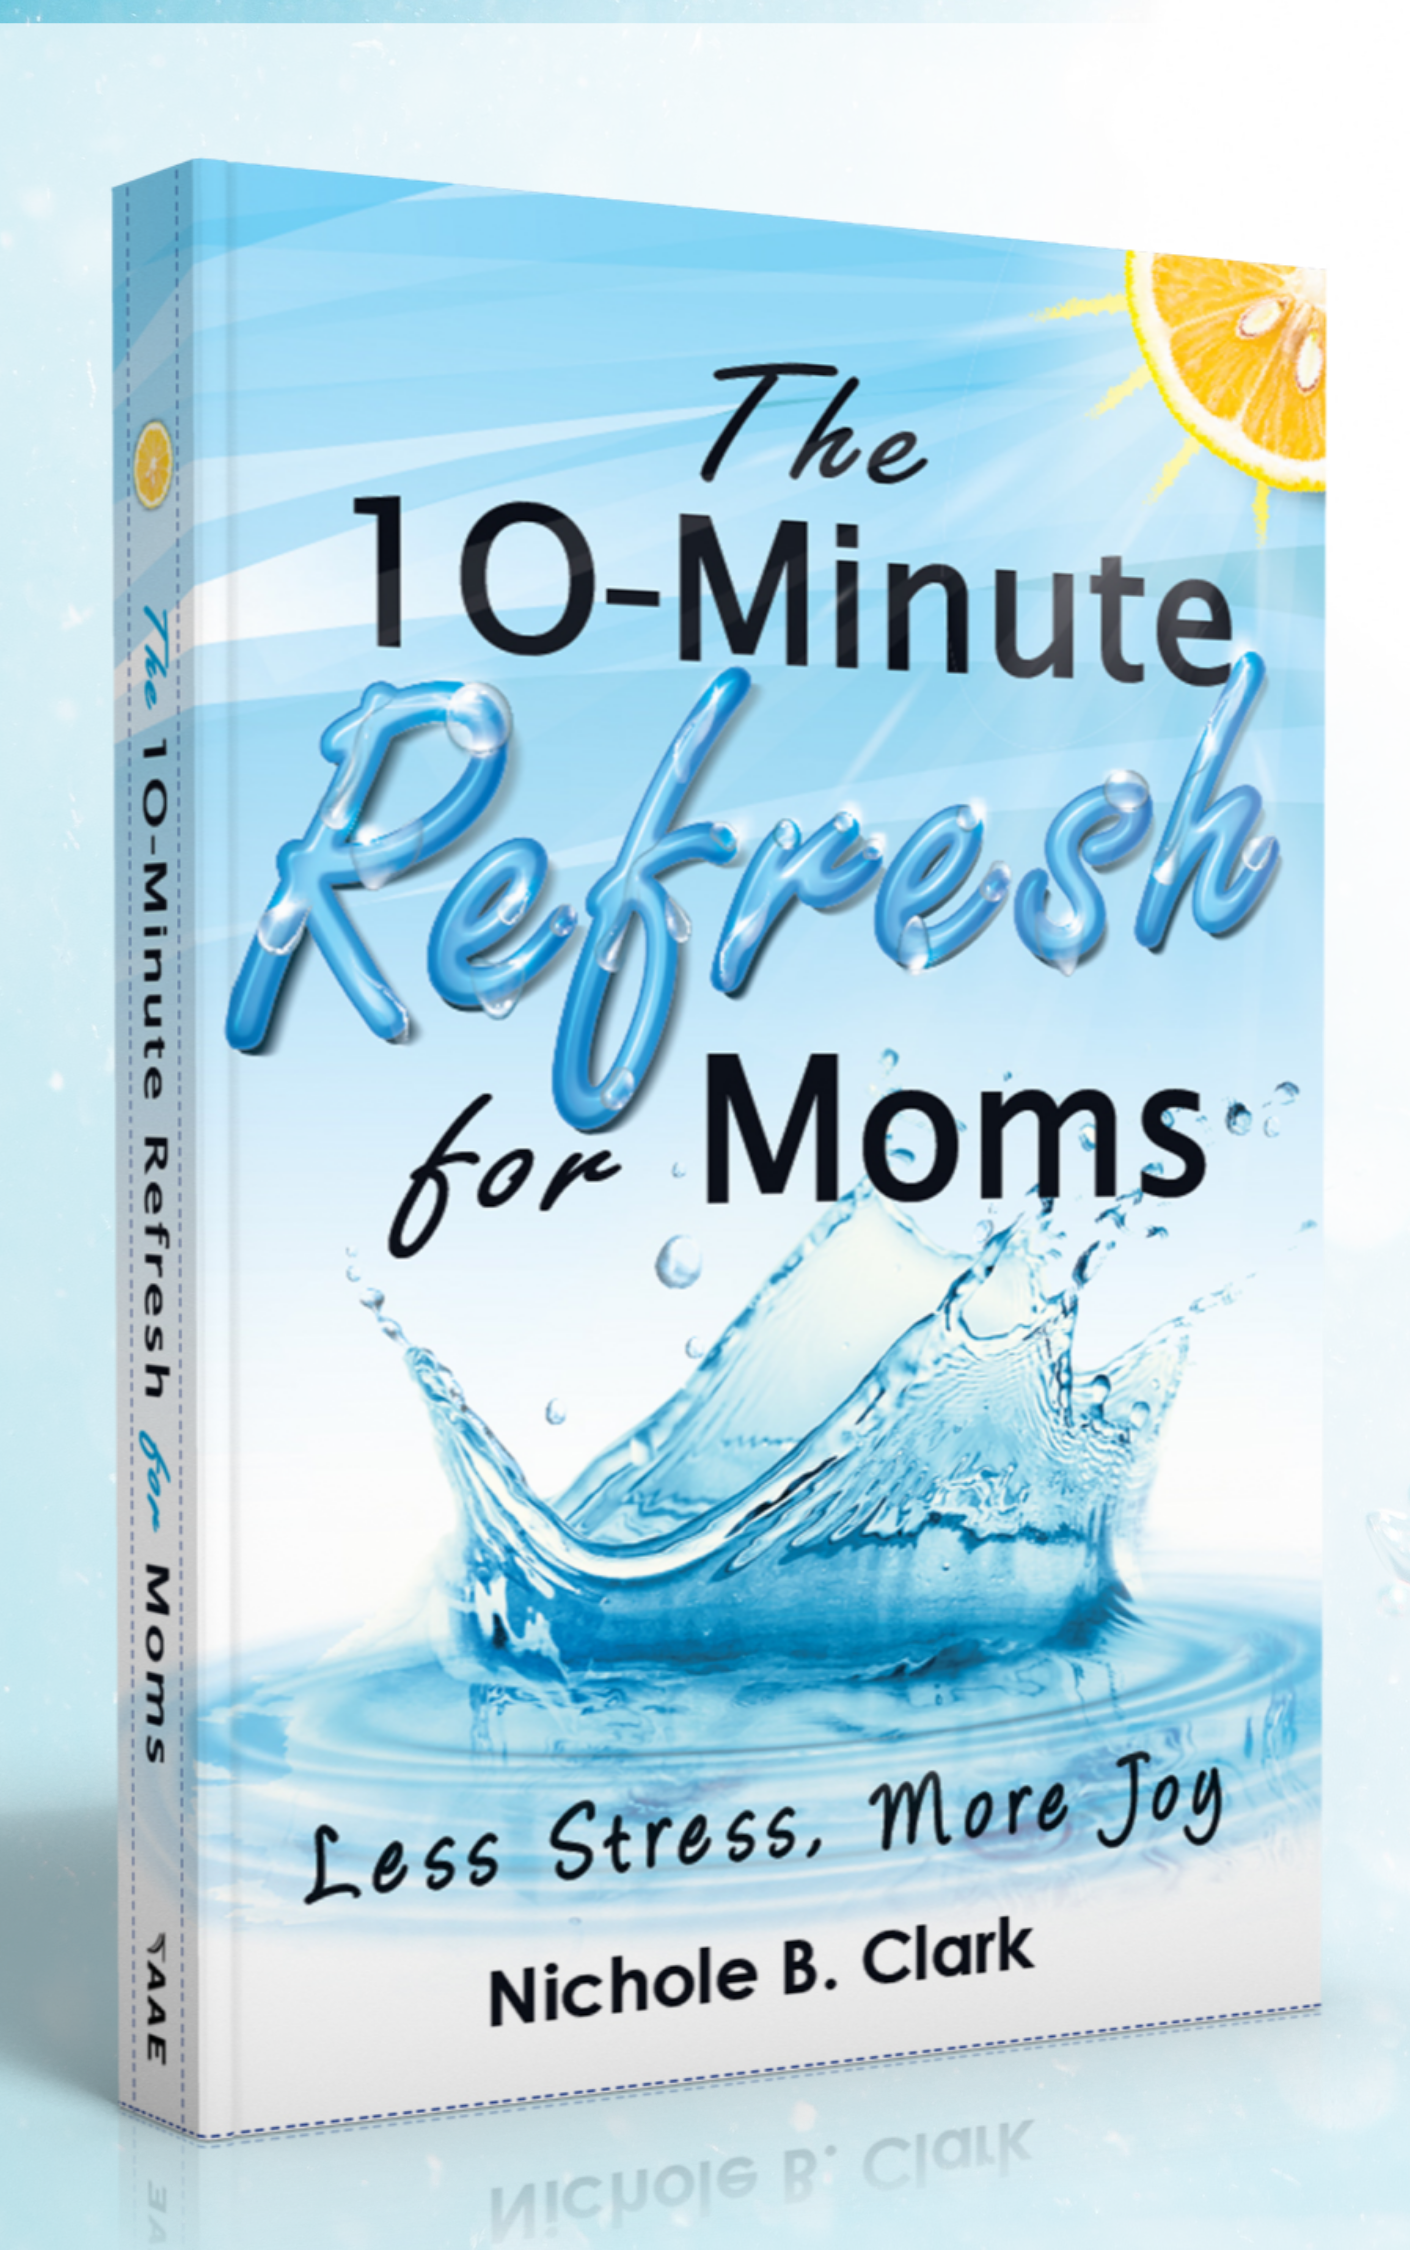 The 10-Minute Refresh for Moms: Less Stress, More Joy --Physical Book